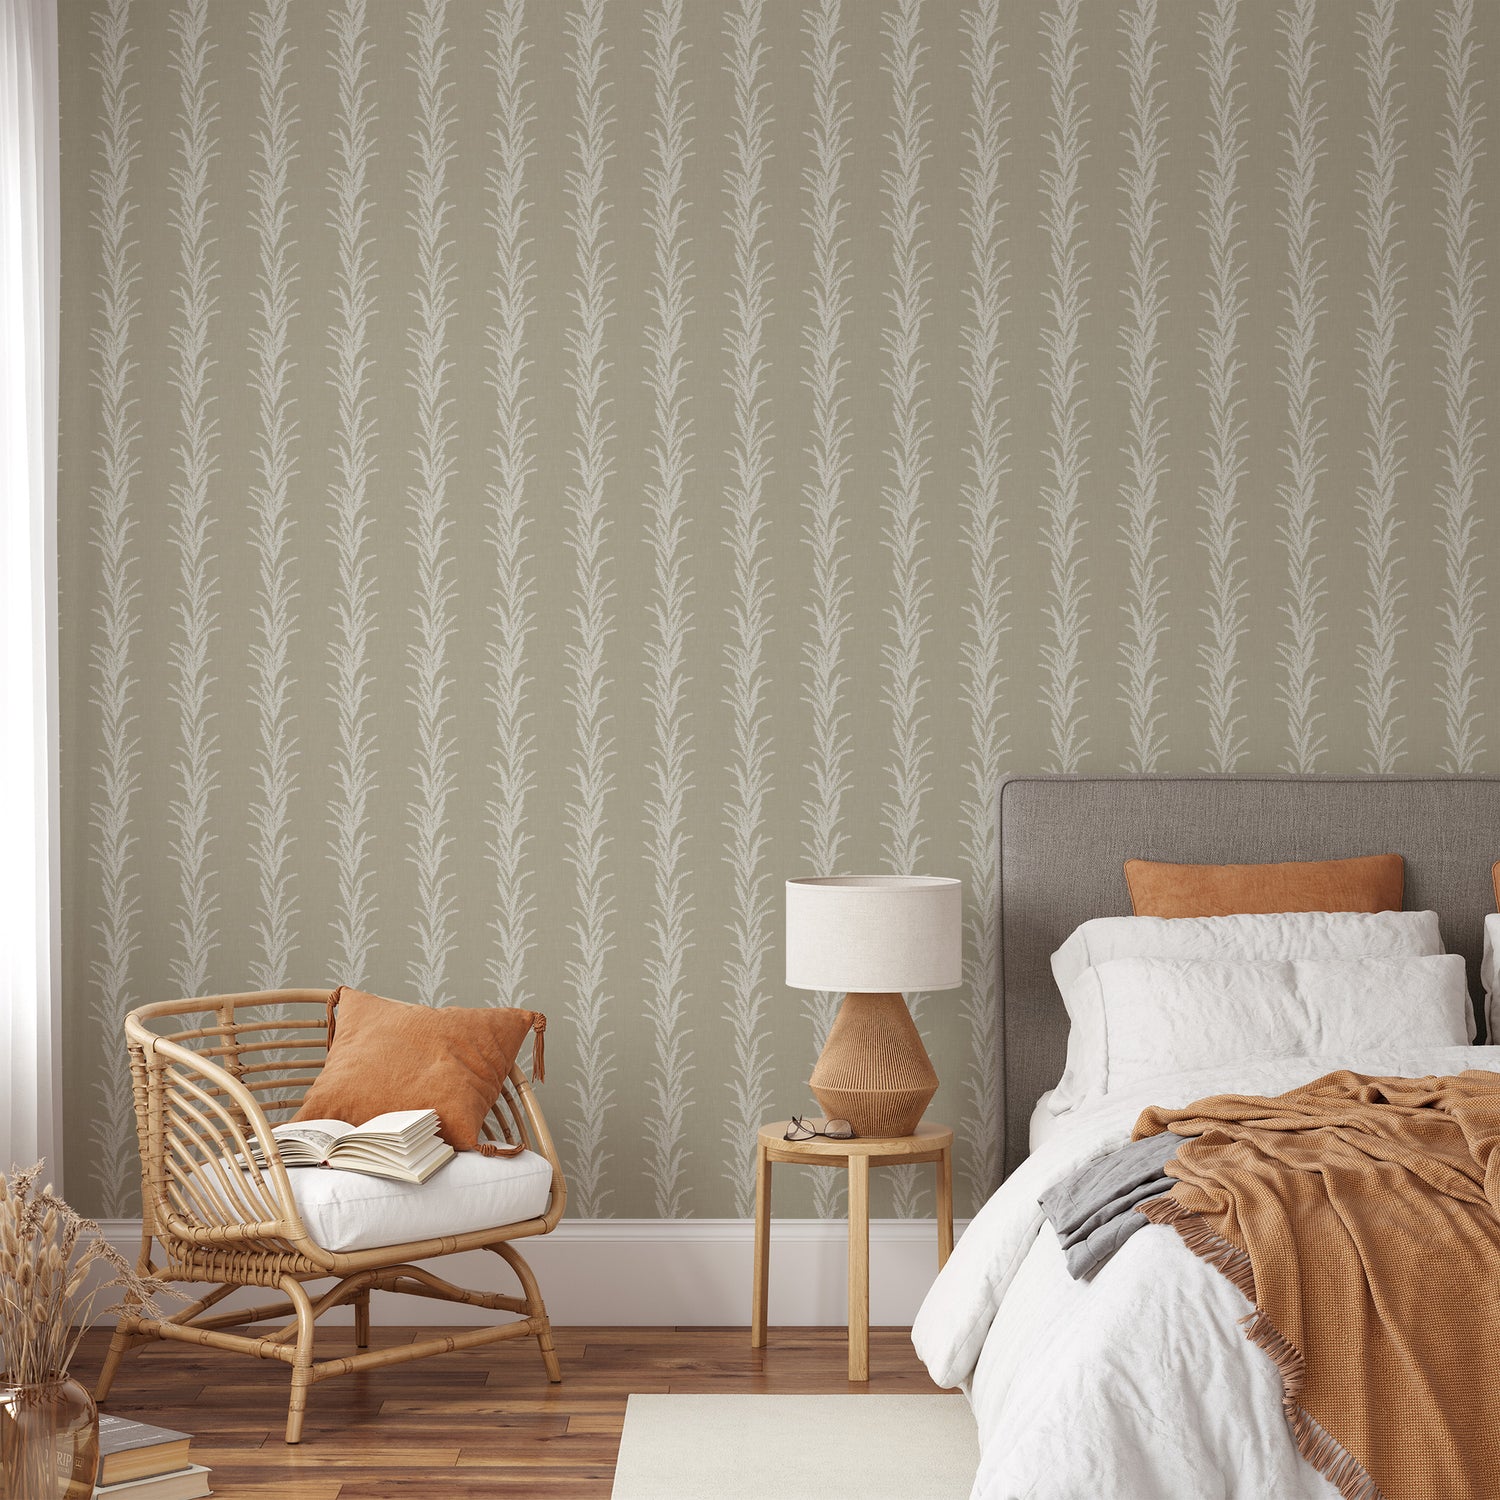 Make your space come alive with this Vertical Vines Wallpaper. Its distinctive vertical lines add texture and class, creating a sophisticated, modern look that exudes elegance and exclusivity. 